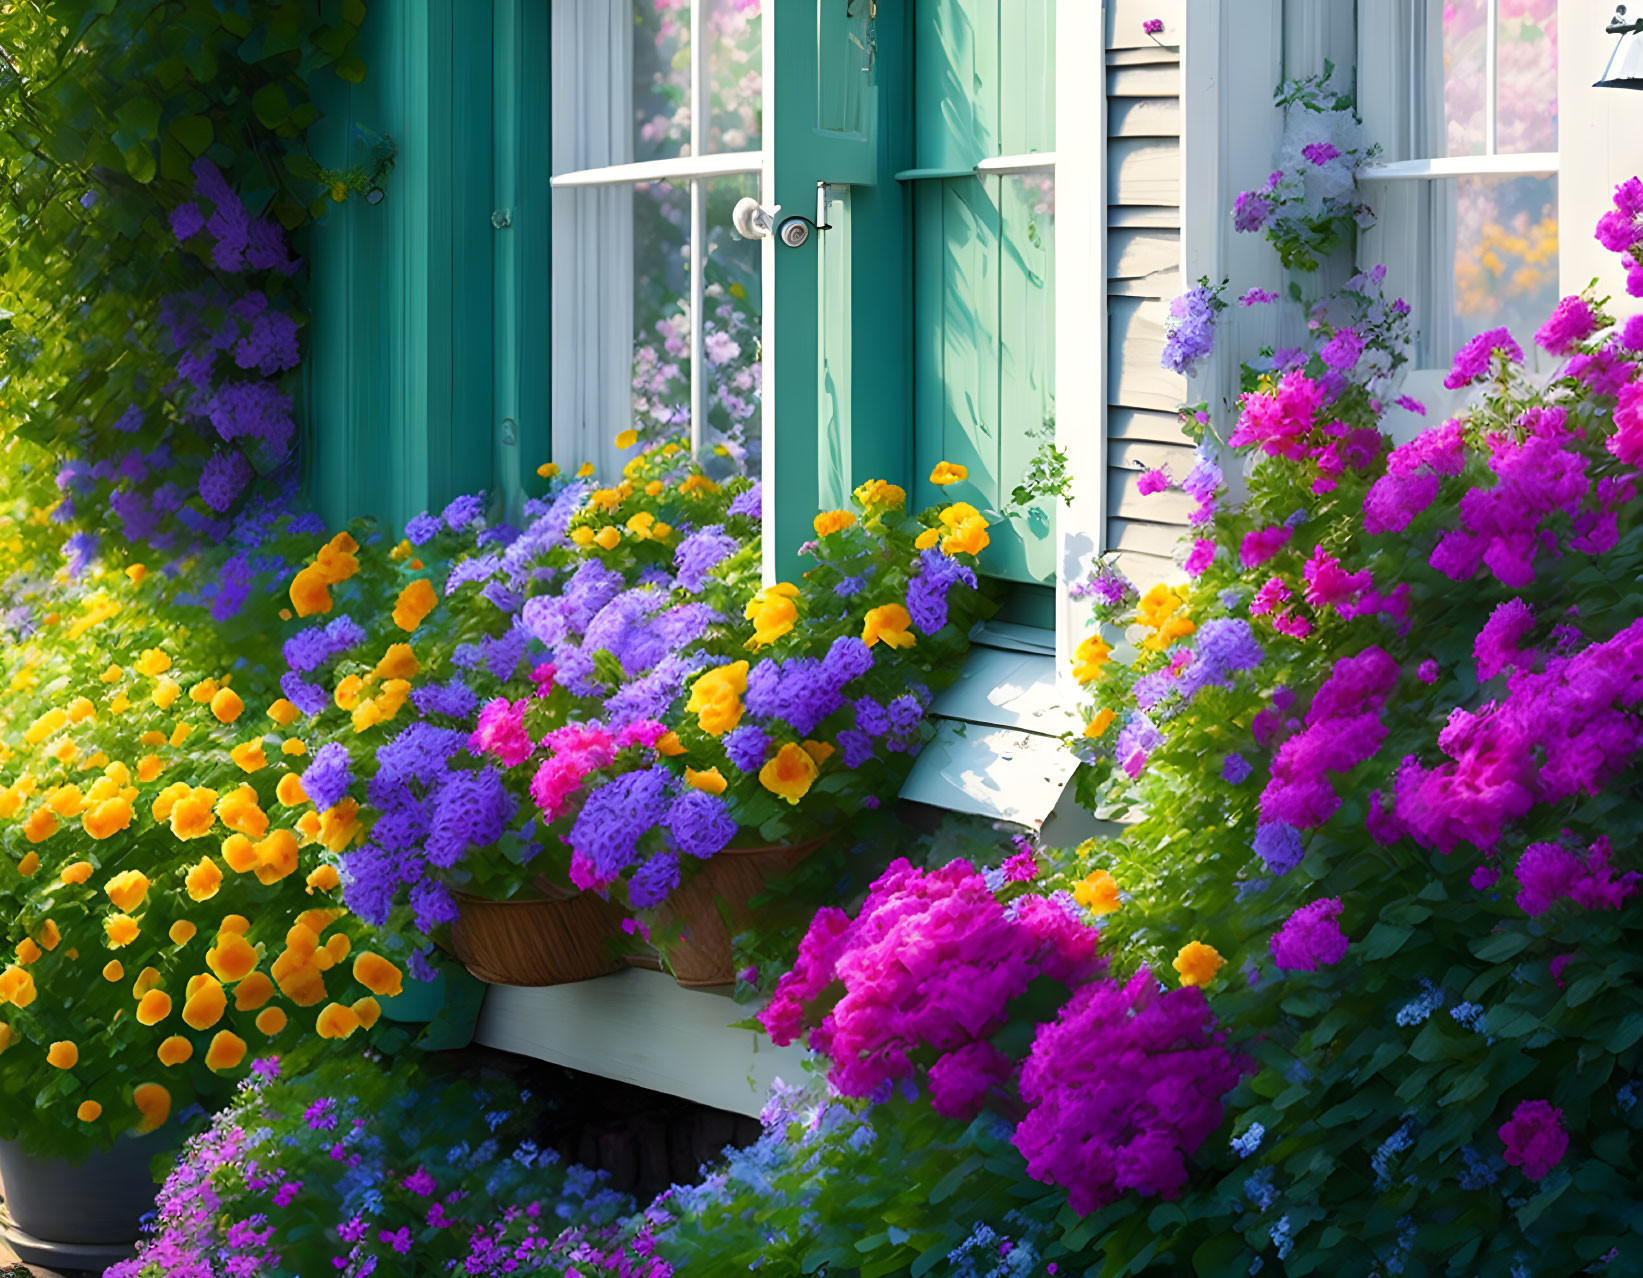 Colorful Blooming Flowers on Window Ledge with Teal Shutters